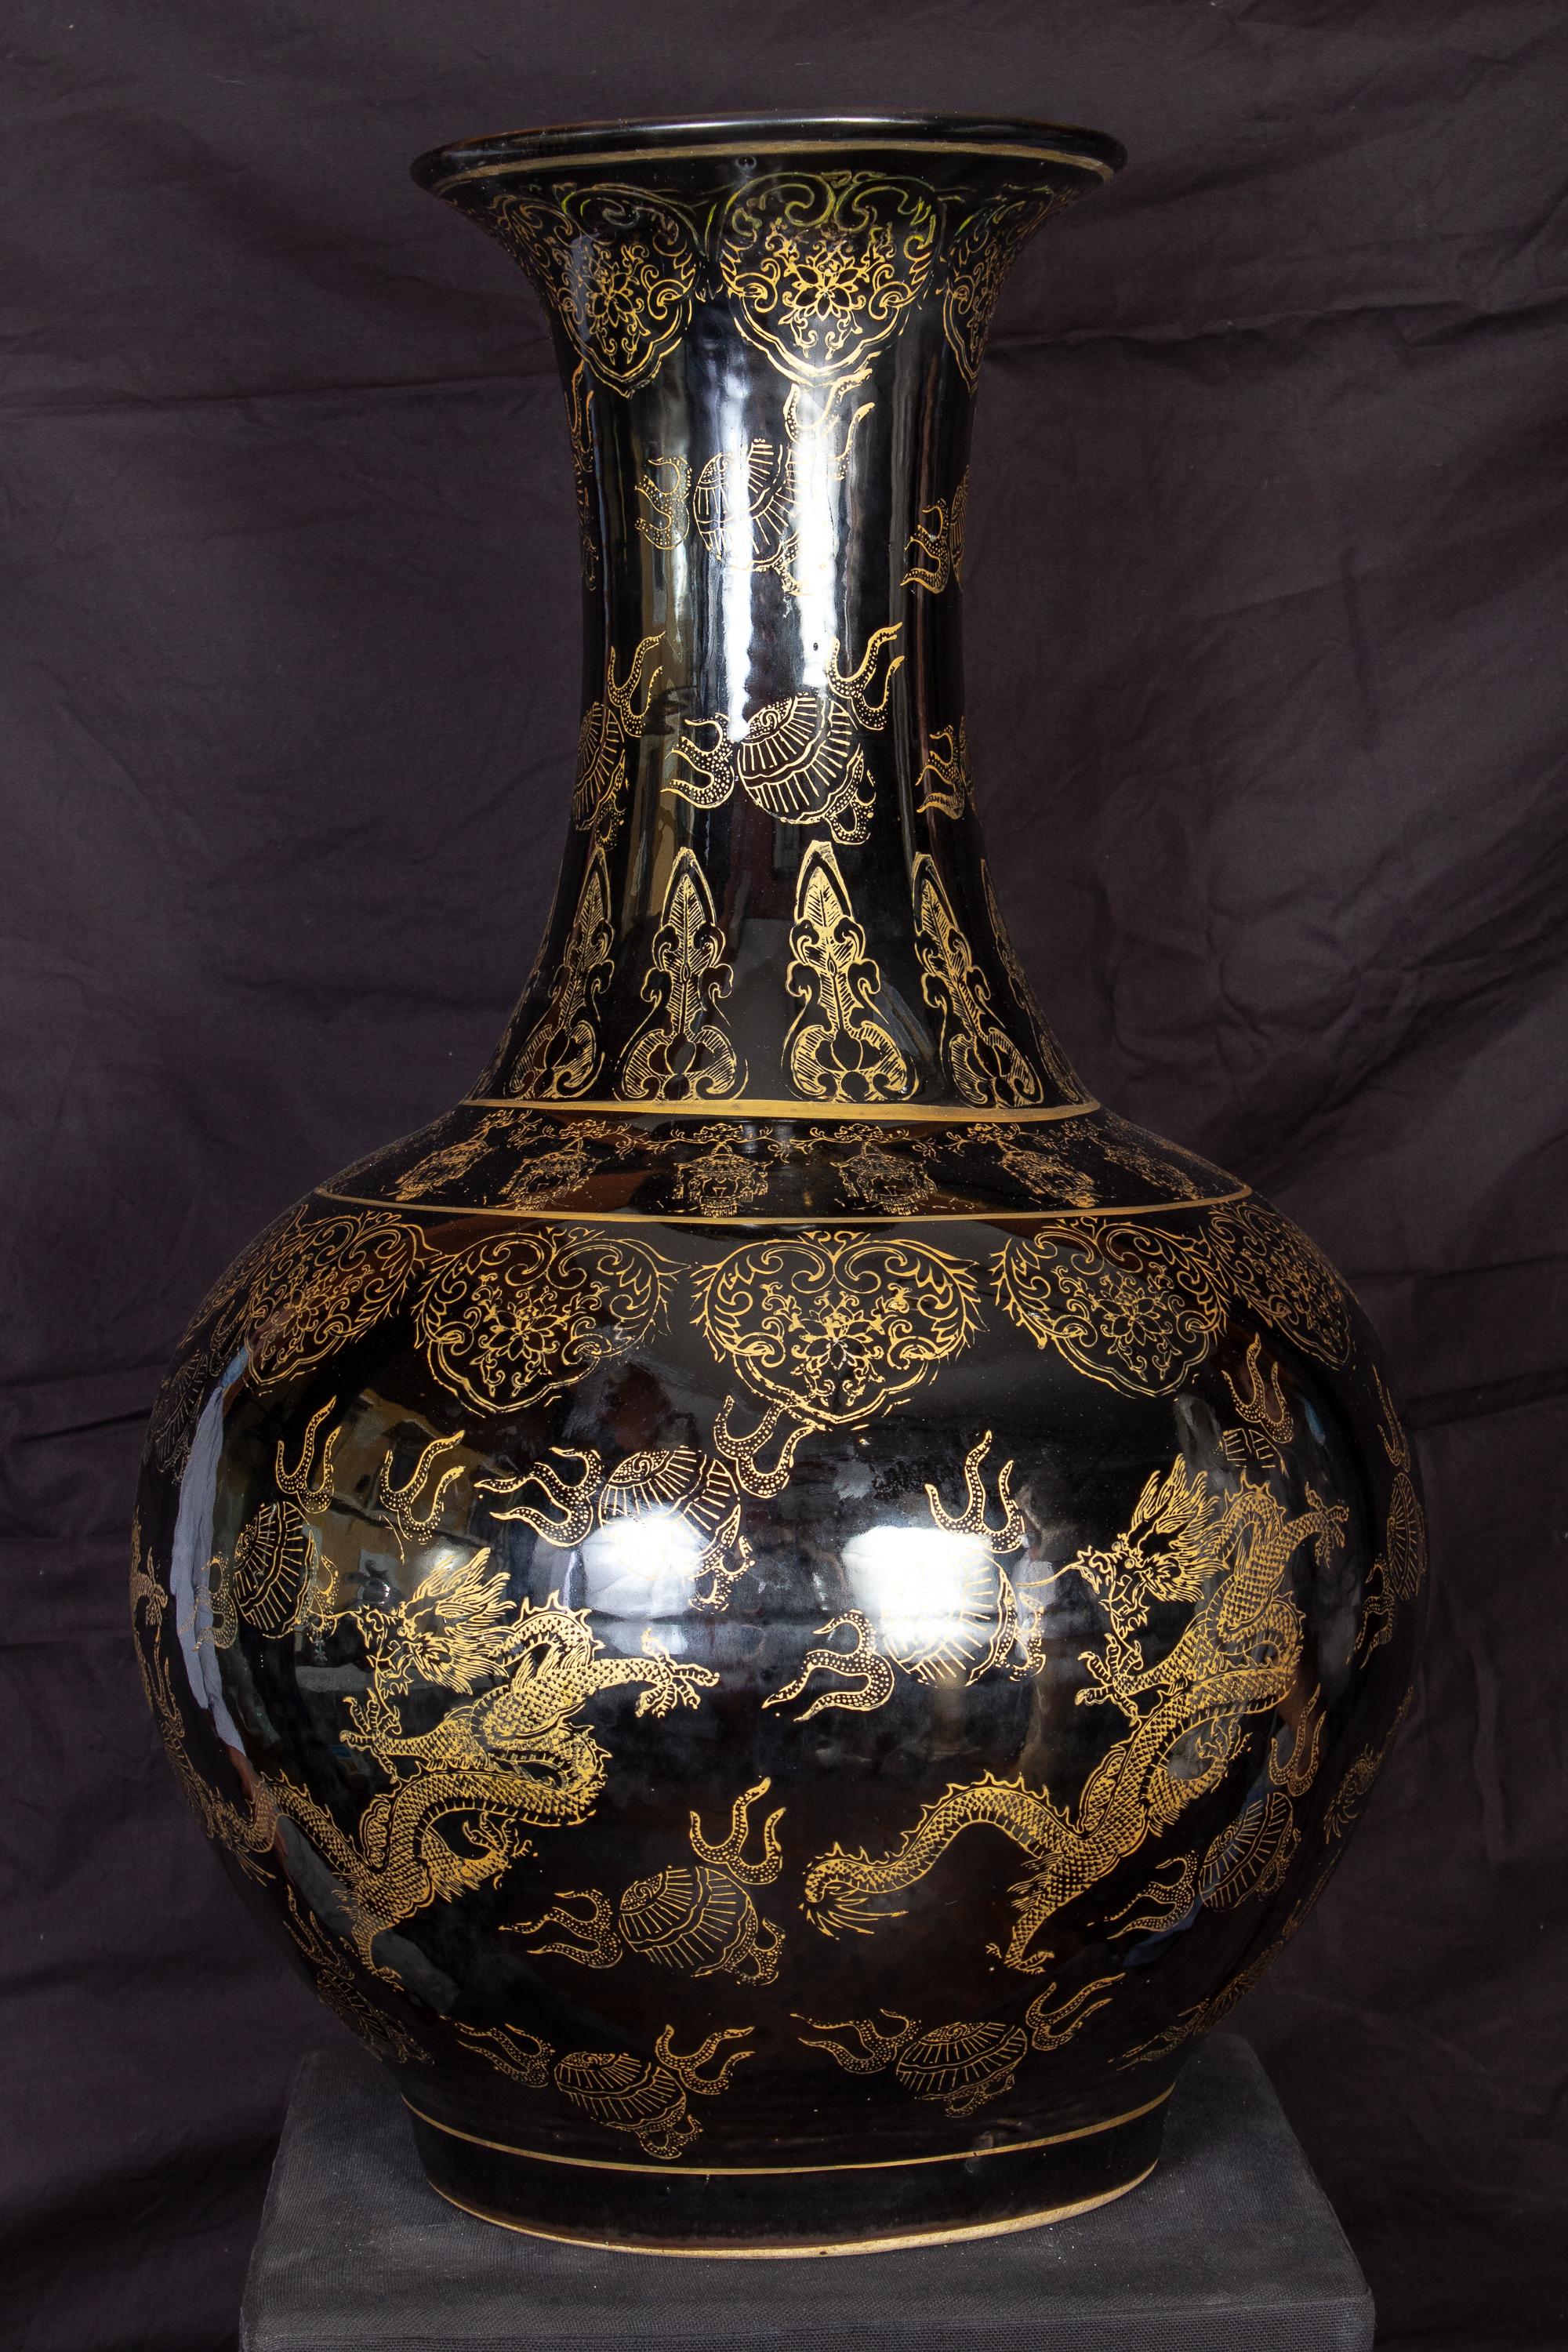 Elegant pair of huge Chinese vases. Each gold painted with a composite floral patterns and dragons.
These highly decorative Vases can also be uses as lamp bases. 
Measure: Height 60 cm.